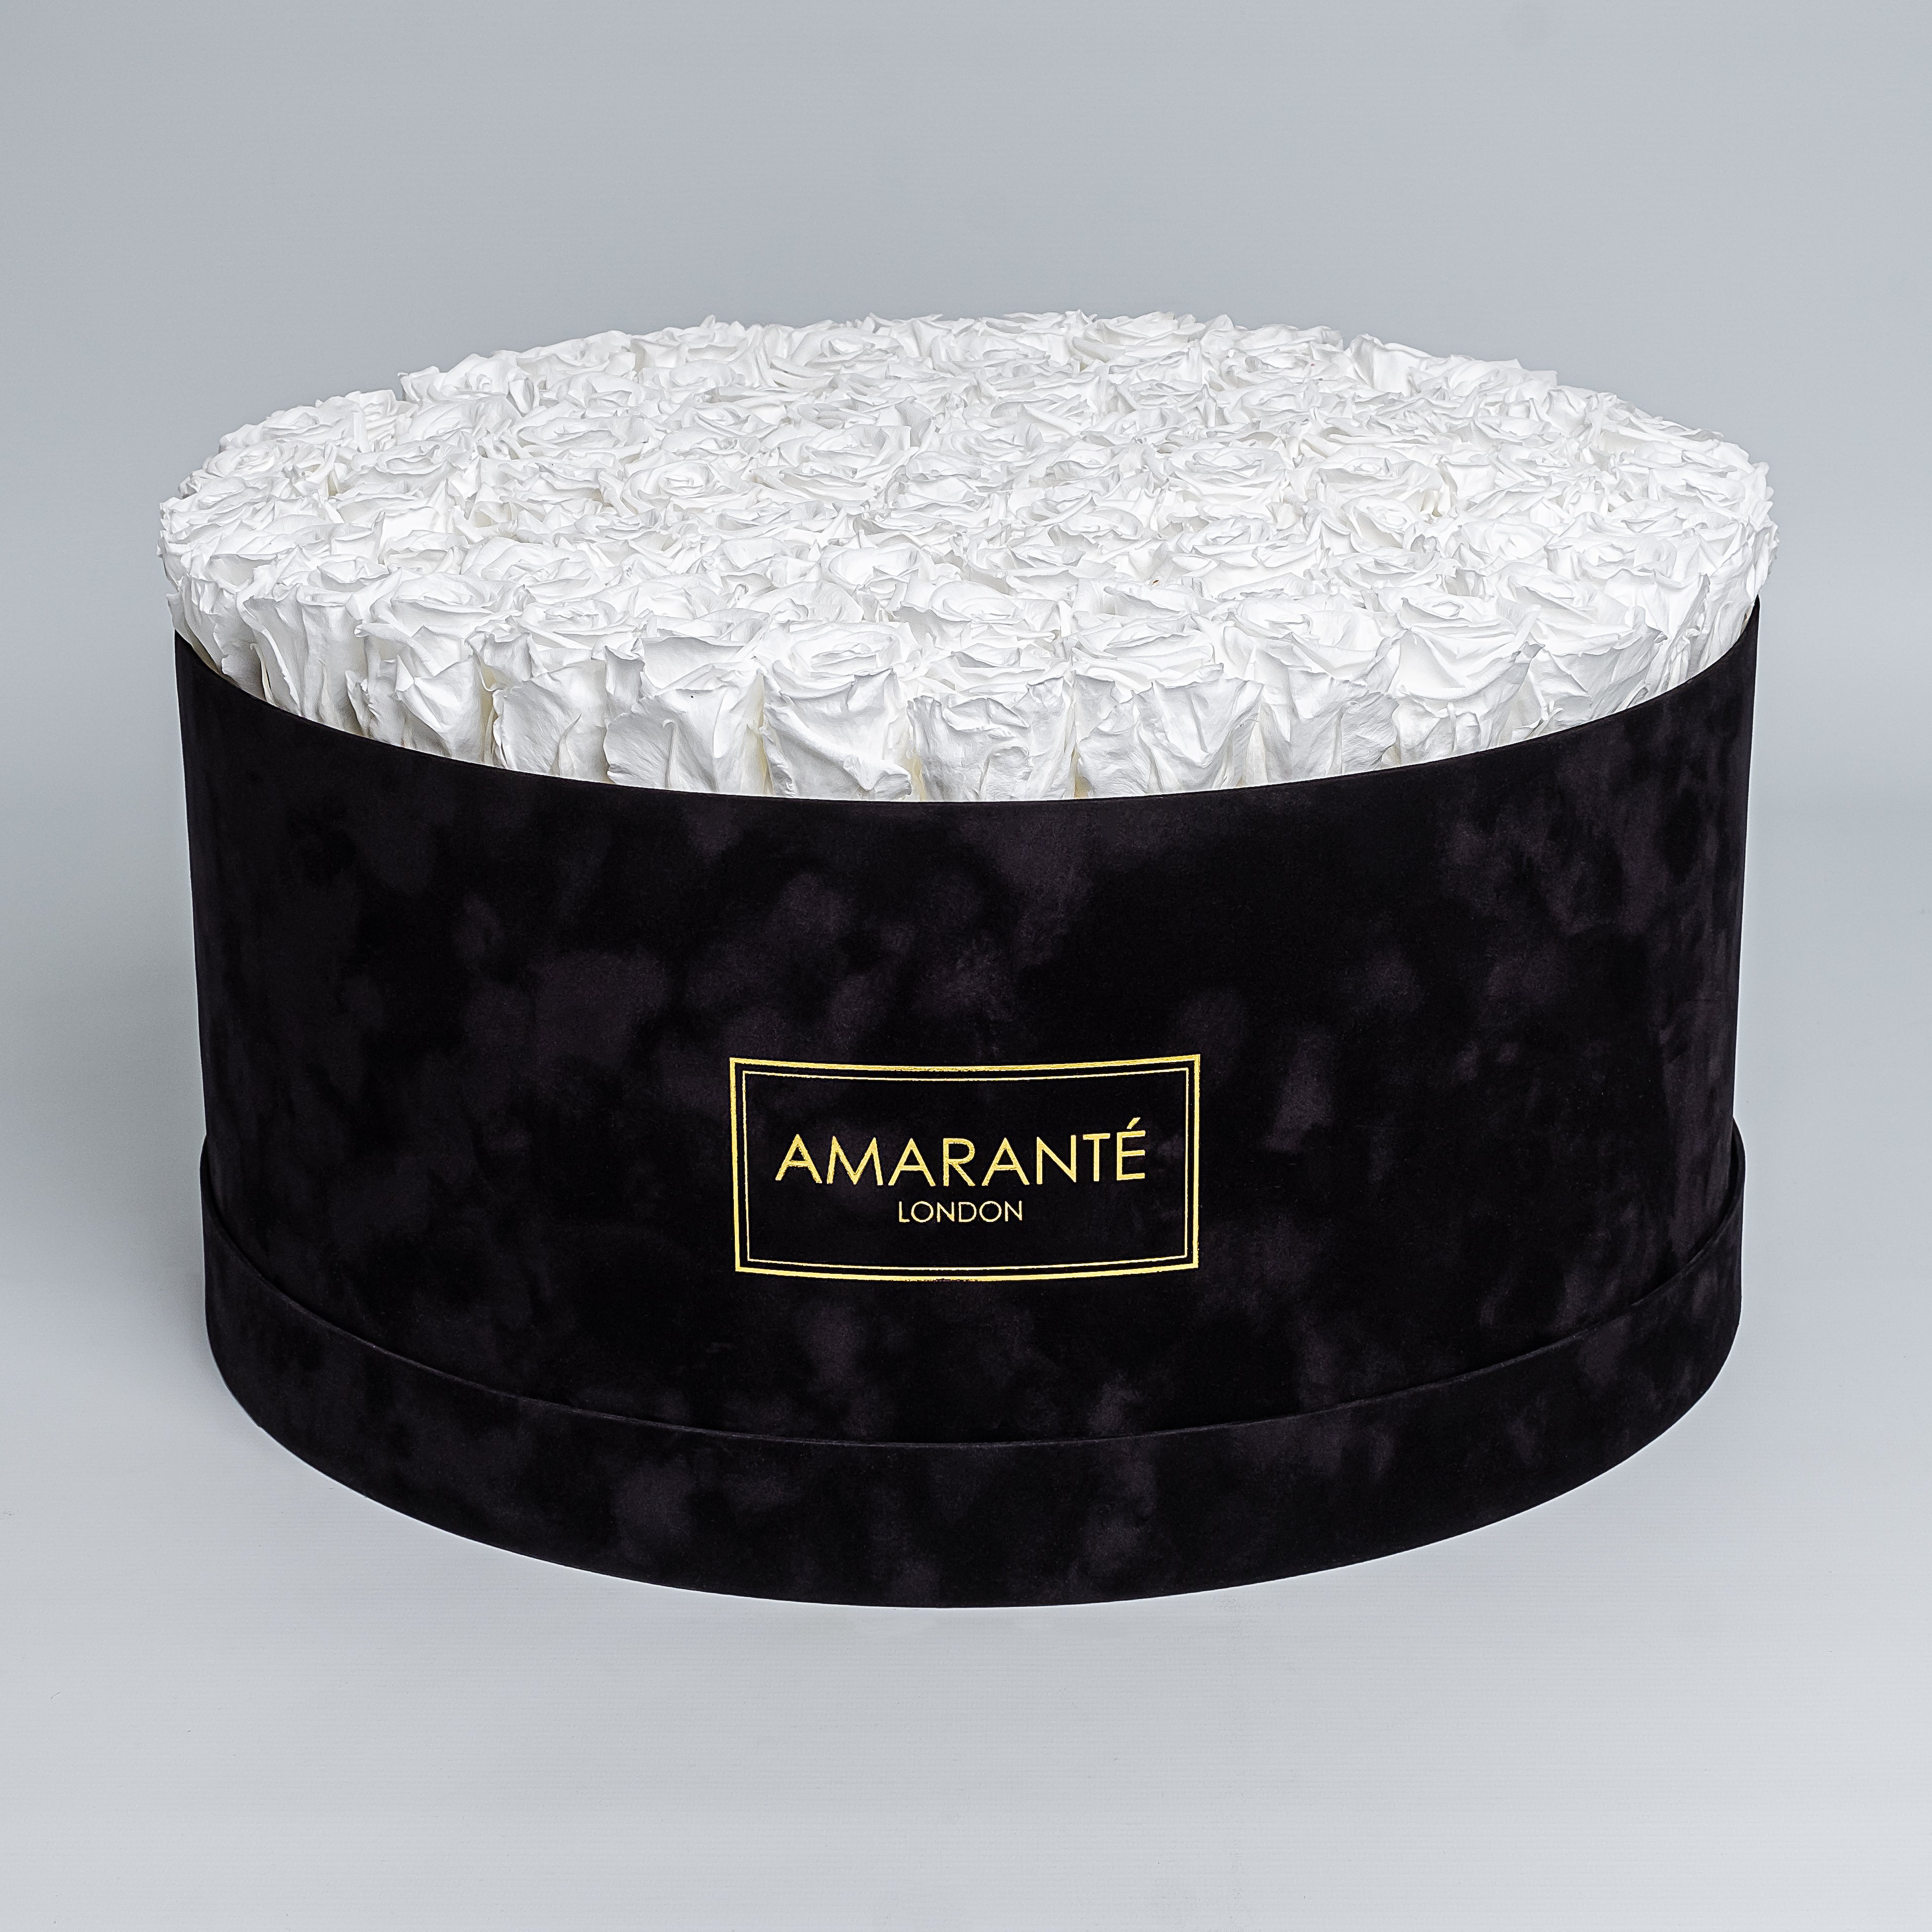 Elegant display of pure white forever roses in a chic black hatbox with delicate suede finish, symbolising enduring elegance and sophistication. Perfect for gifting to loved ones on Birthdays, Anniversaries, Valentine's Day or other special events of everyday life. Free UK delivery.